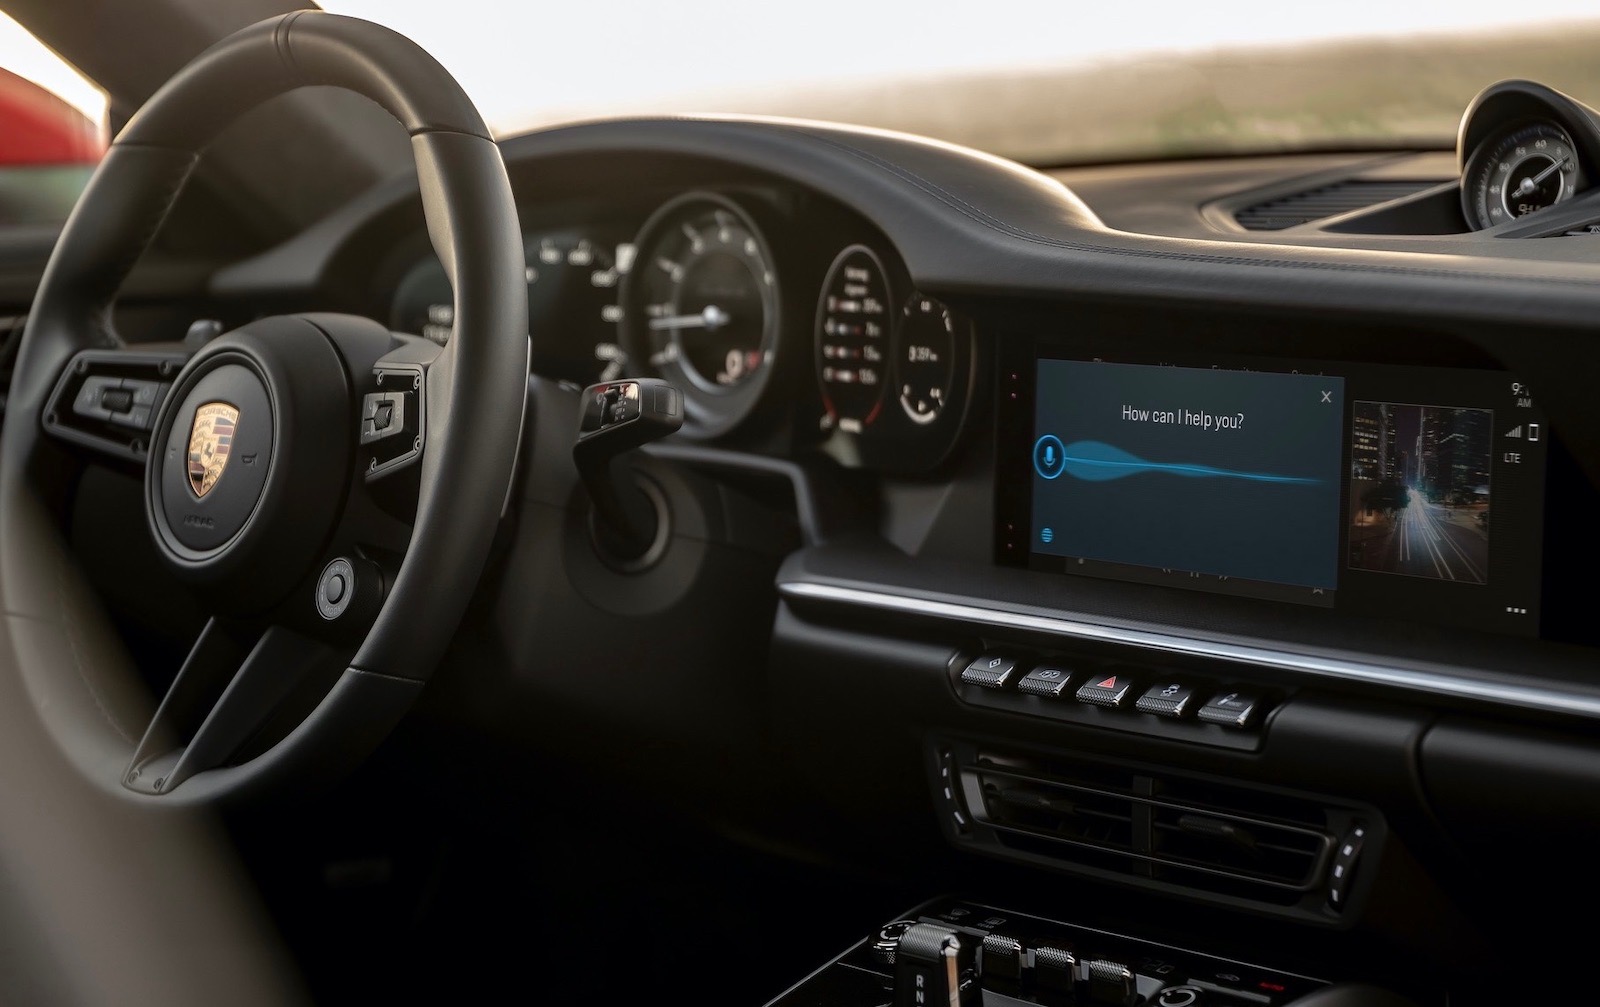 Porsche introduces Android Auto with PCM ‘6.0’ infotainment system